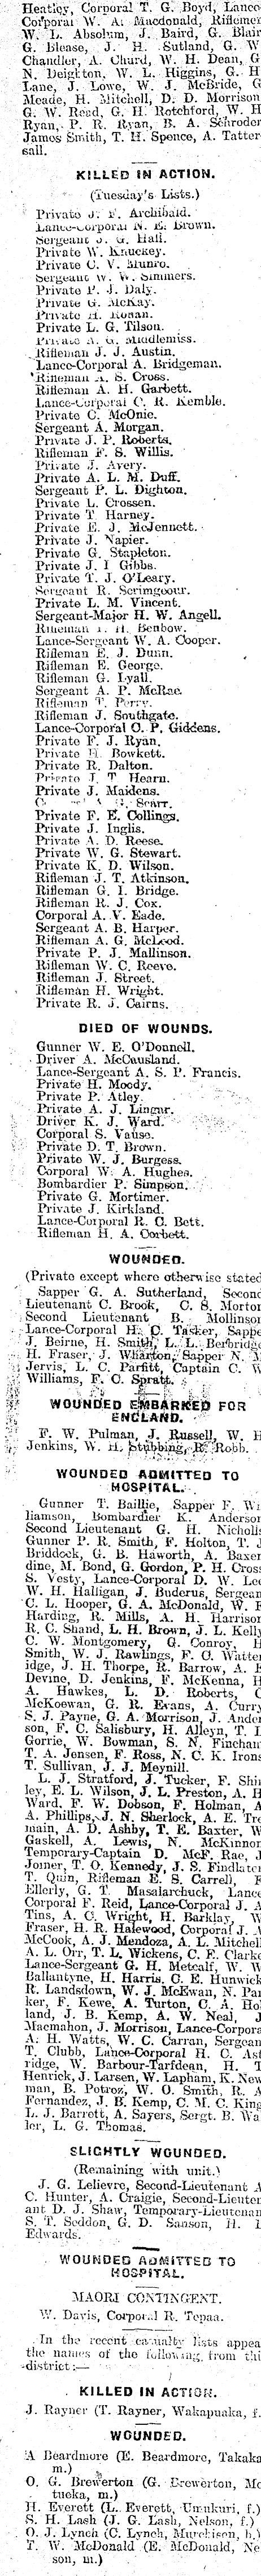 Papers Past Newspapers Colonist 27 June 1917 Casualty List